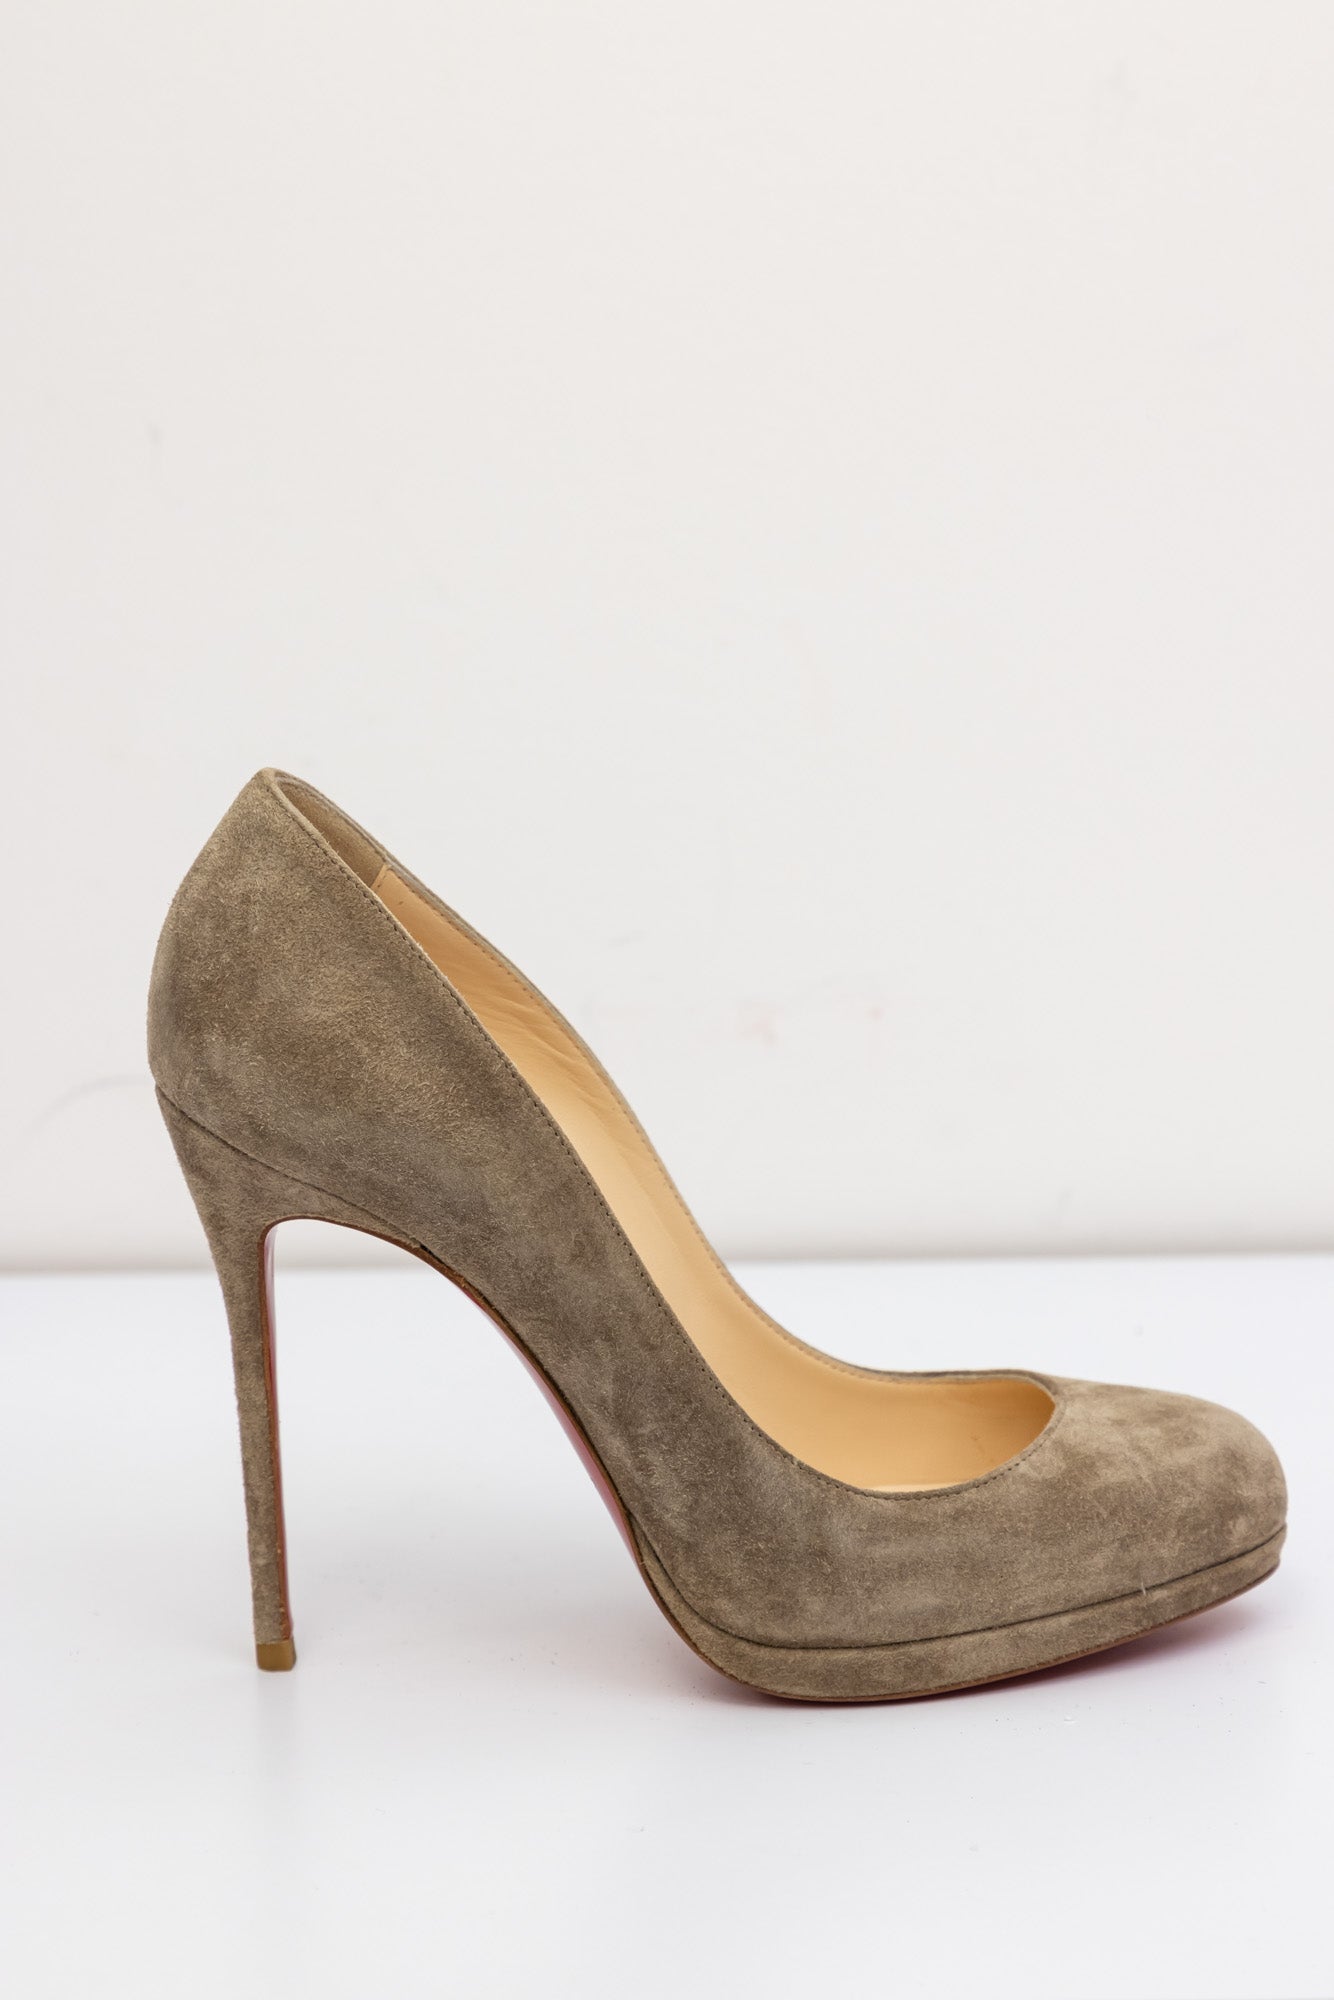 CHRISTIAN LOUBOUTIN Grey Suede Red Bottom Round Toe Pump Heels | Size IT 37.5 | Very Good Condition | Made in Italy